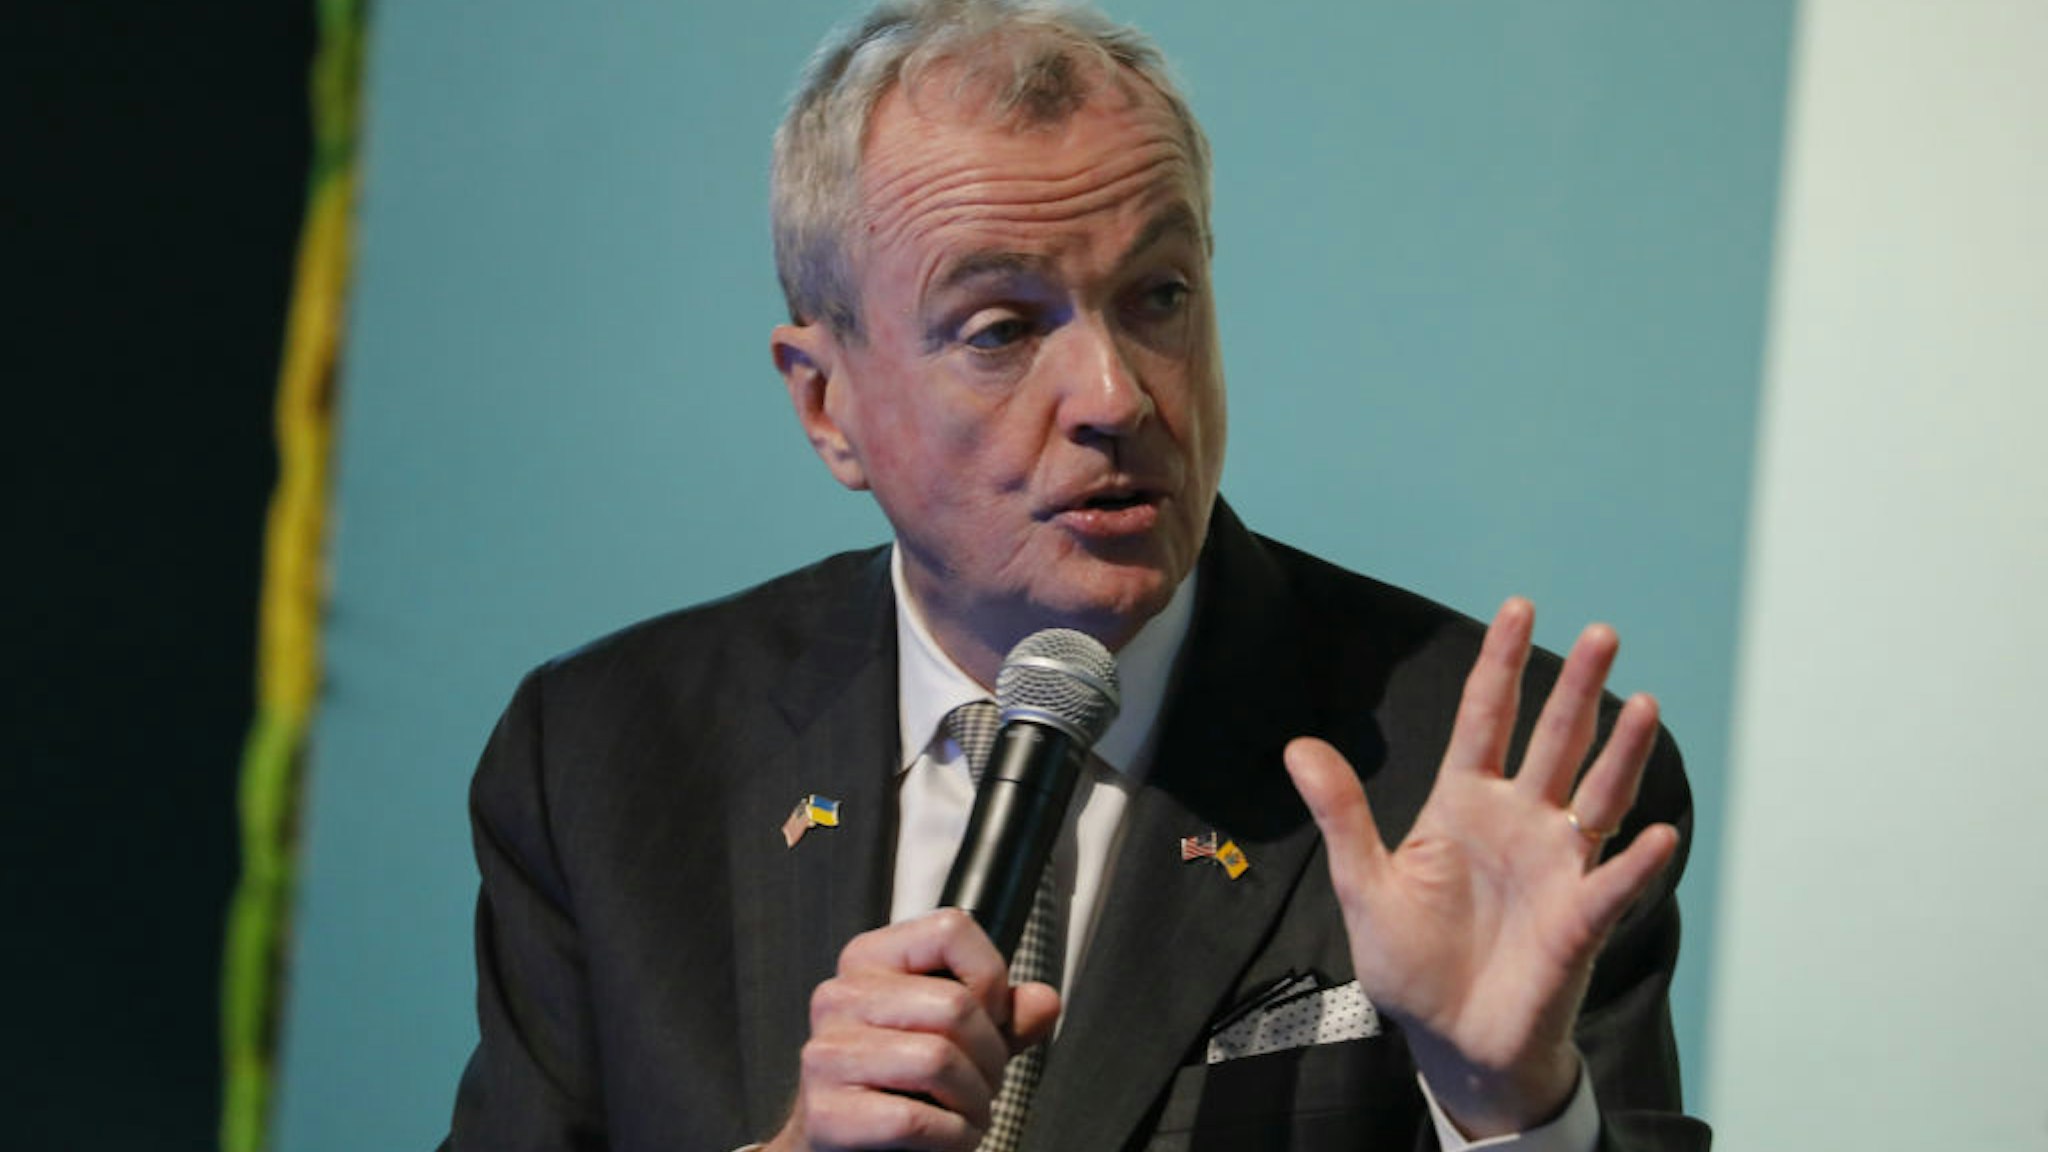 Phil Murphy, governor of New Jersey, speaks during the Aspen Ideas Climate conference in Miami Beach, Florida, US, on Tuesday, May 10, 2022. The conference is designed for the public to interact, learn, and collaborate with engaged thinkers and doers whose ideas and actions are critical to address the realities of a changing climate.